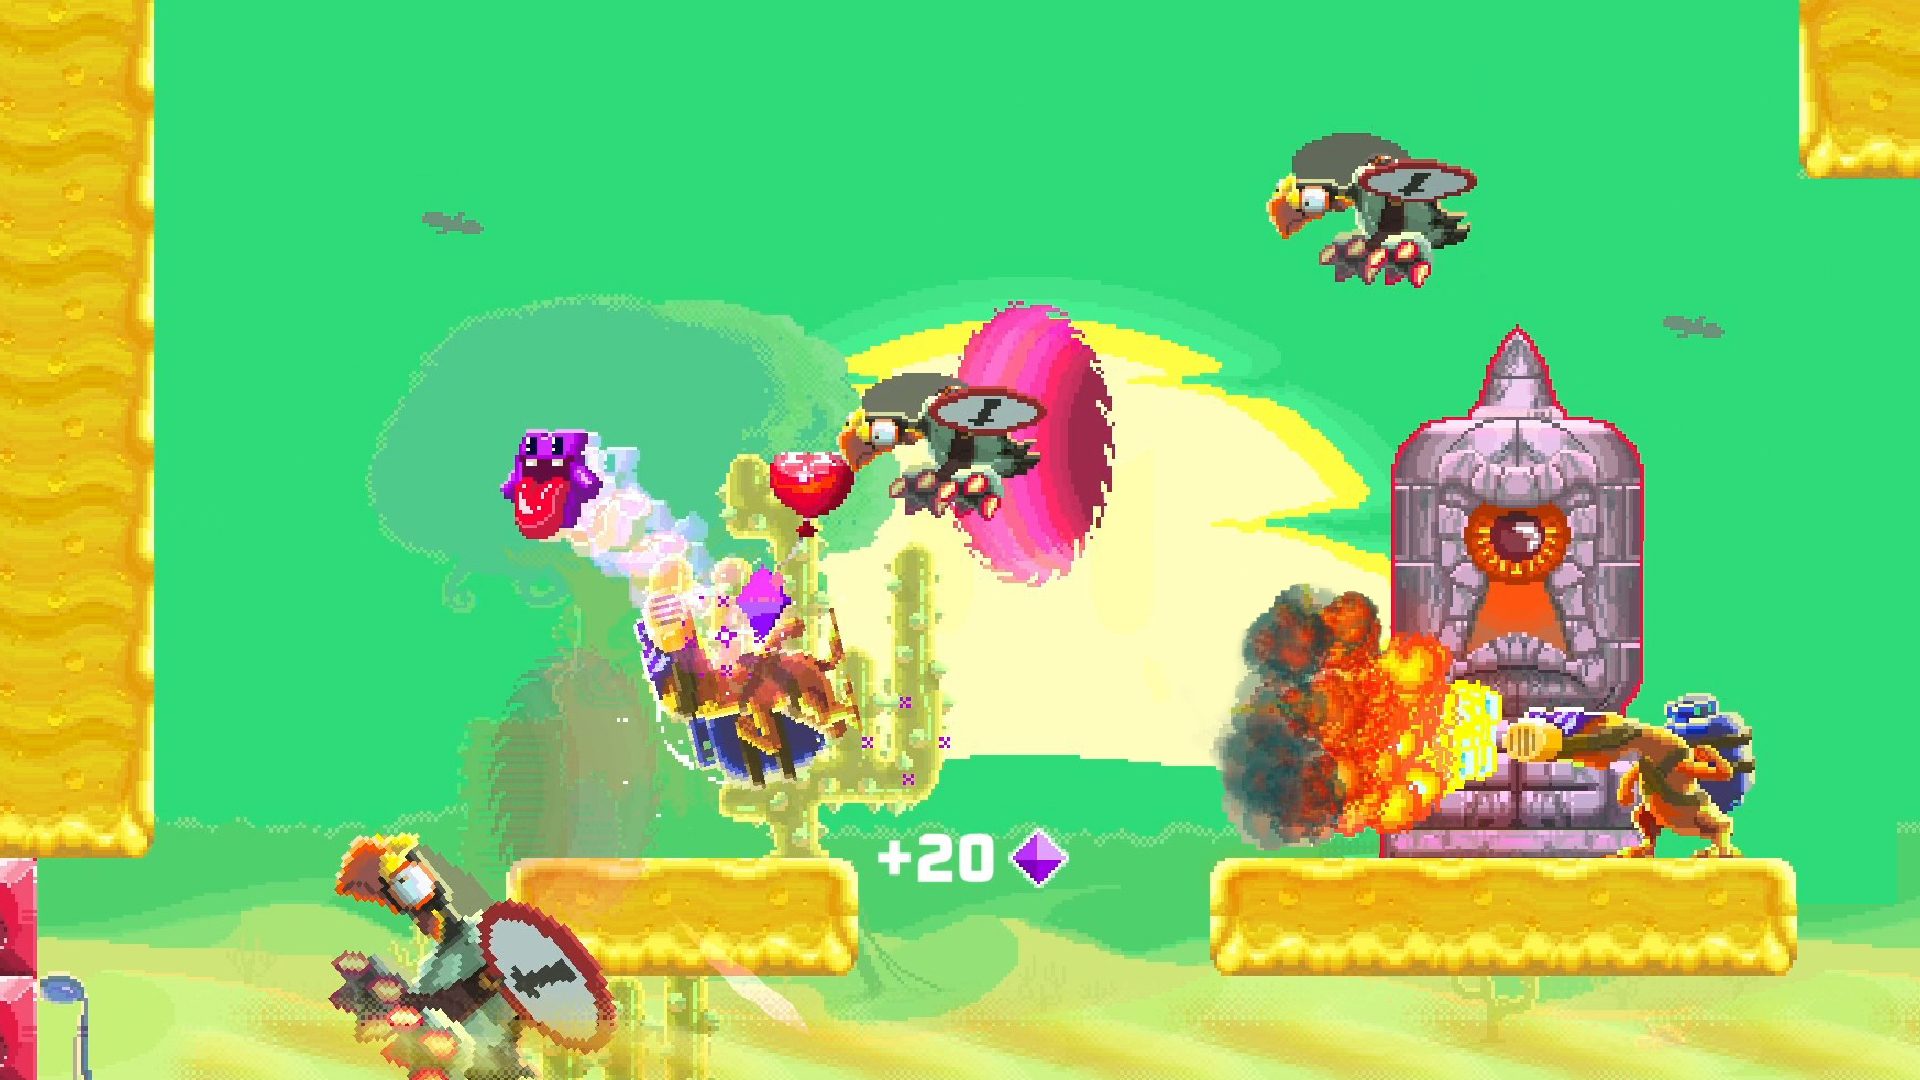 A screenshot showing Super Mombo Quest on Android